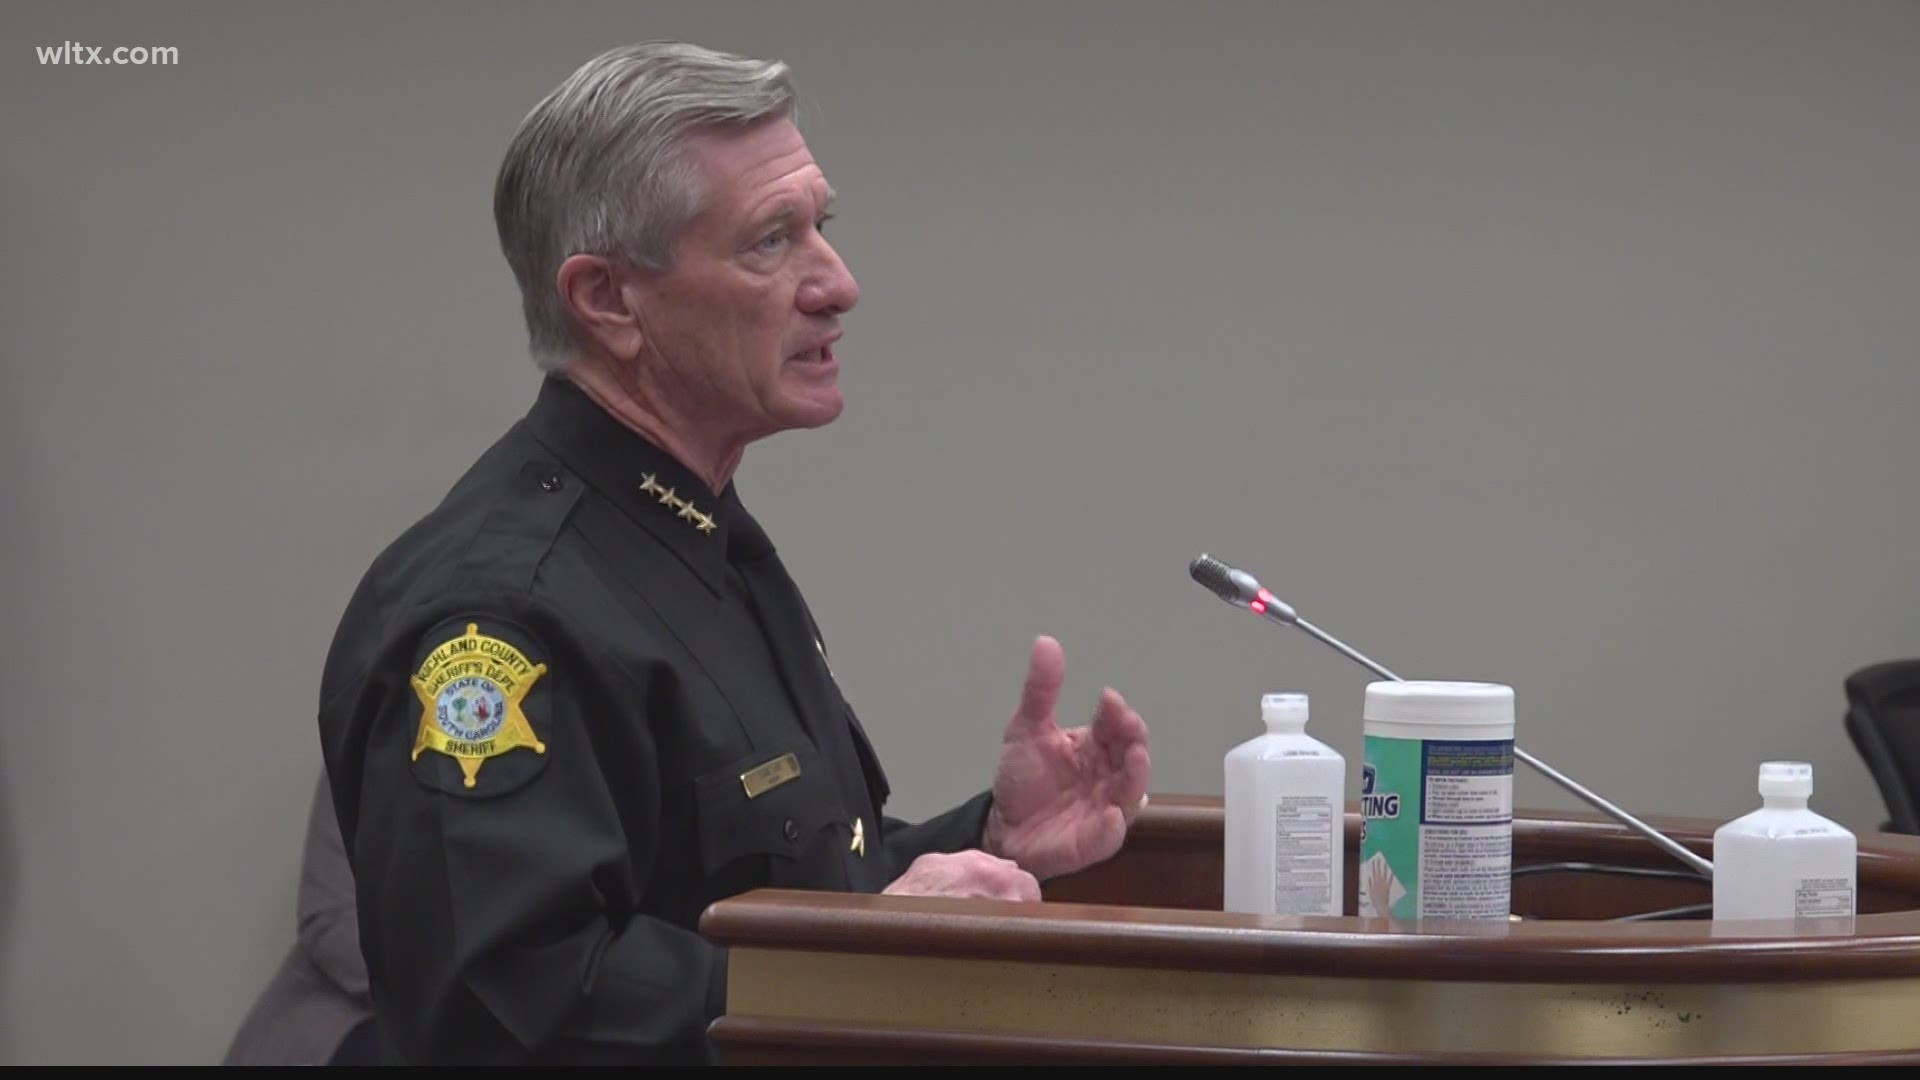 On Tuesday, lawmakers heard public input on the bill from several community leaders, including Sheriff Leon Lott.